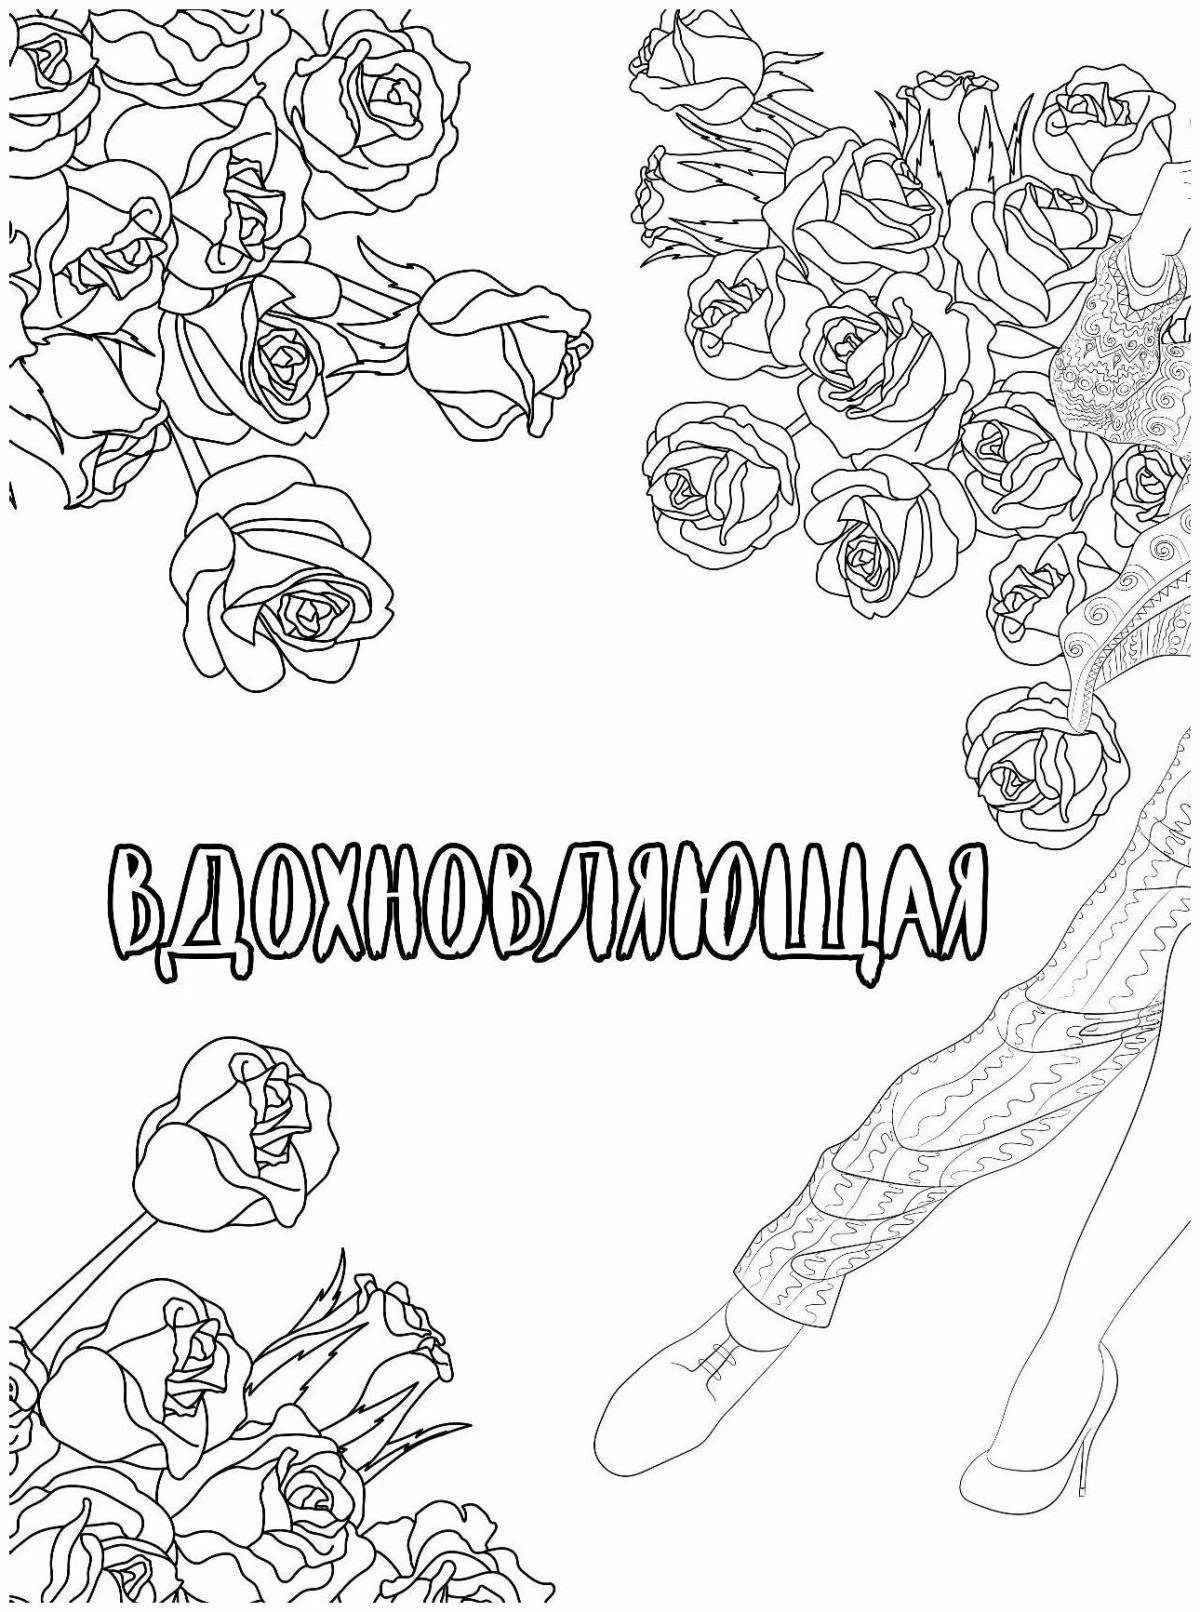 Exmo animated coloring page